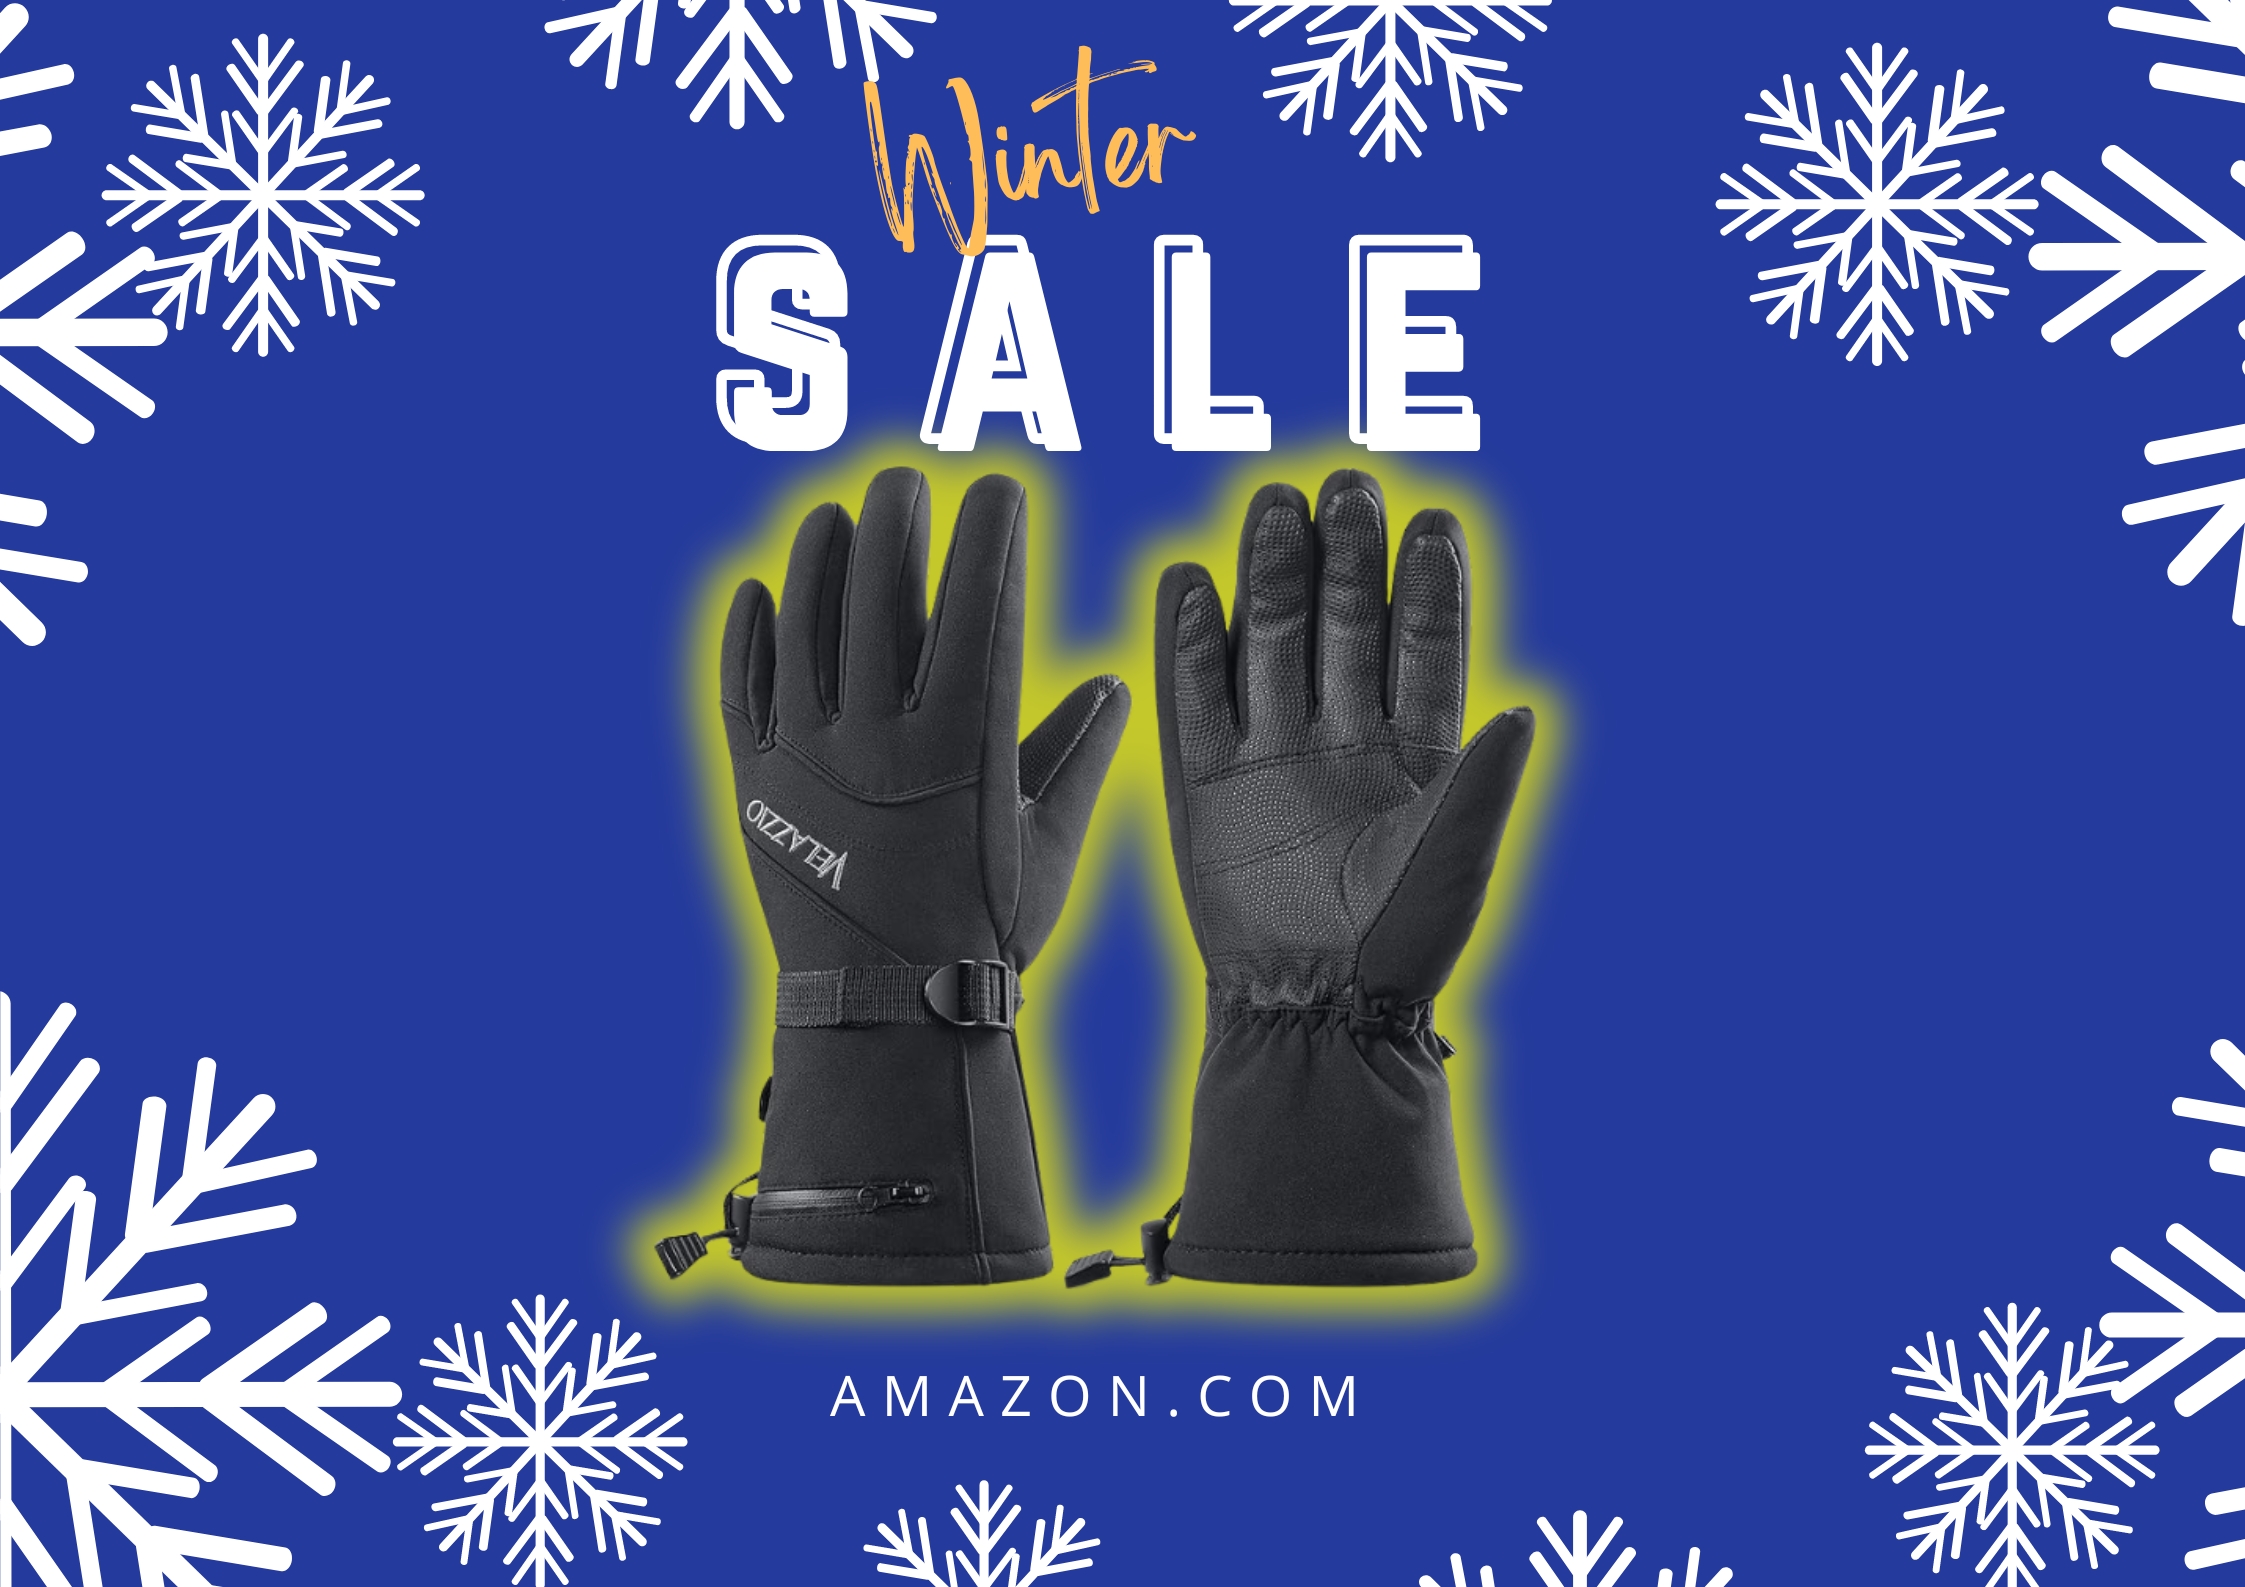 You are currently viewing Best Ski Gloves Roundup: Top Picks for Best Ski Gloves